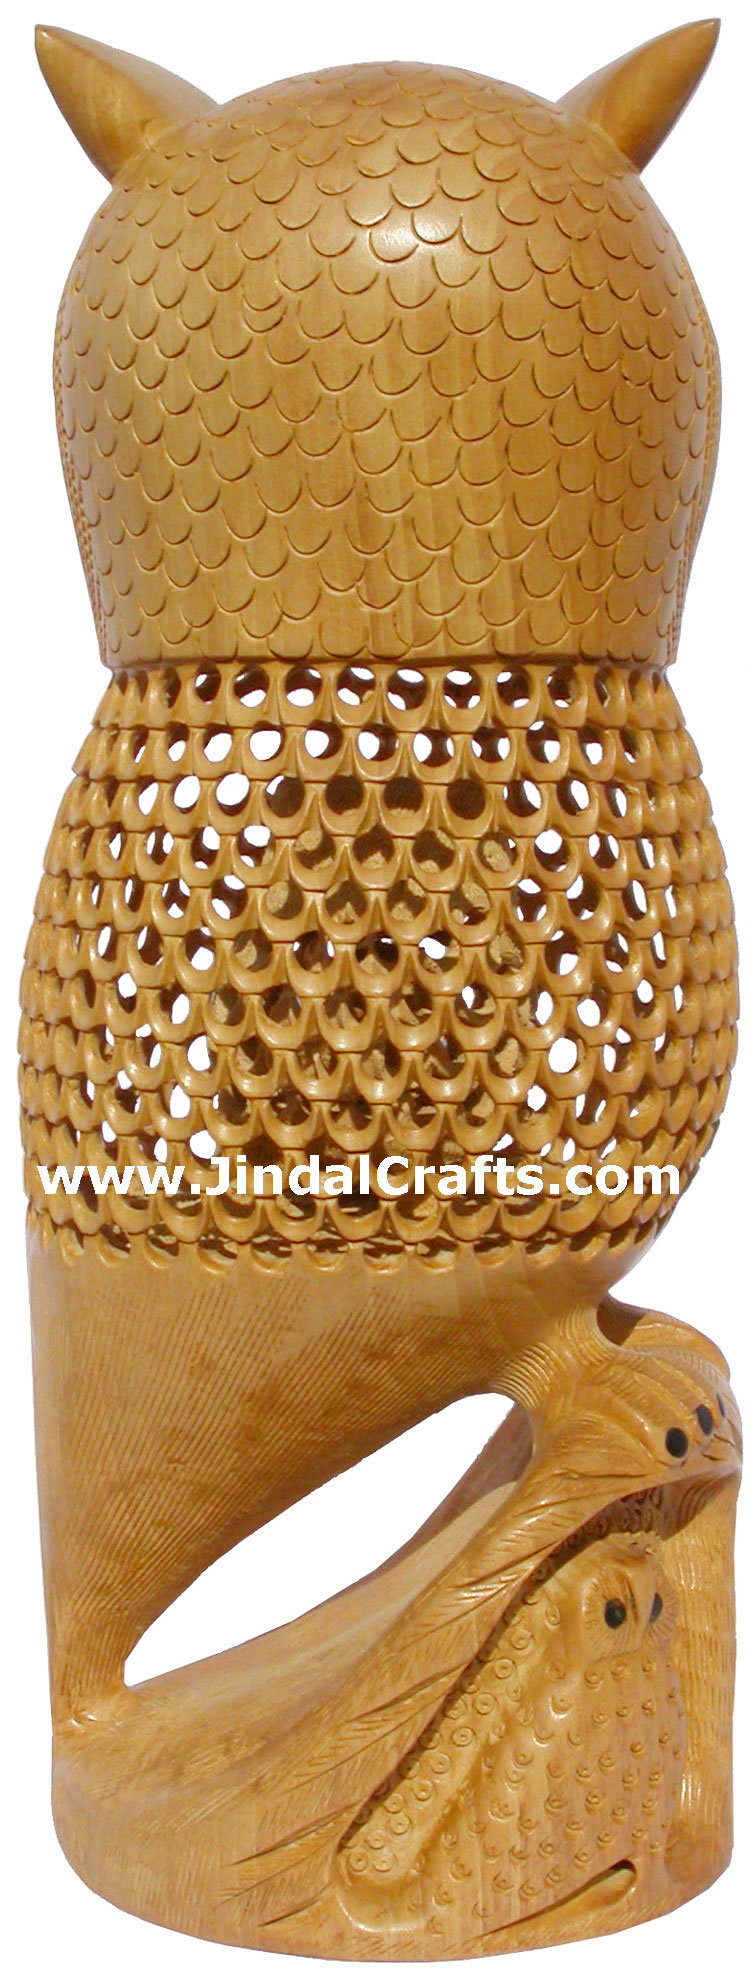 Masterpiece - Hand Carved Hollow Owl Figure Indian Carving Art Bird Figure India